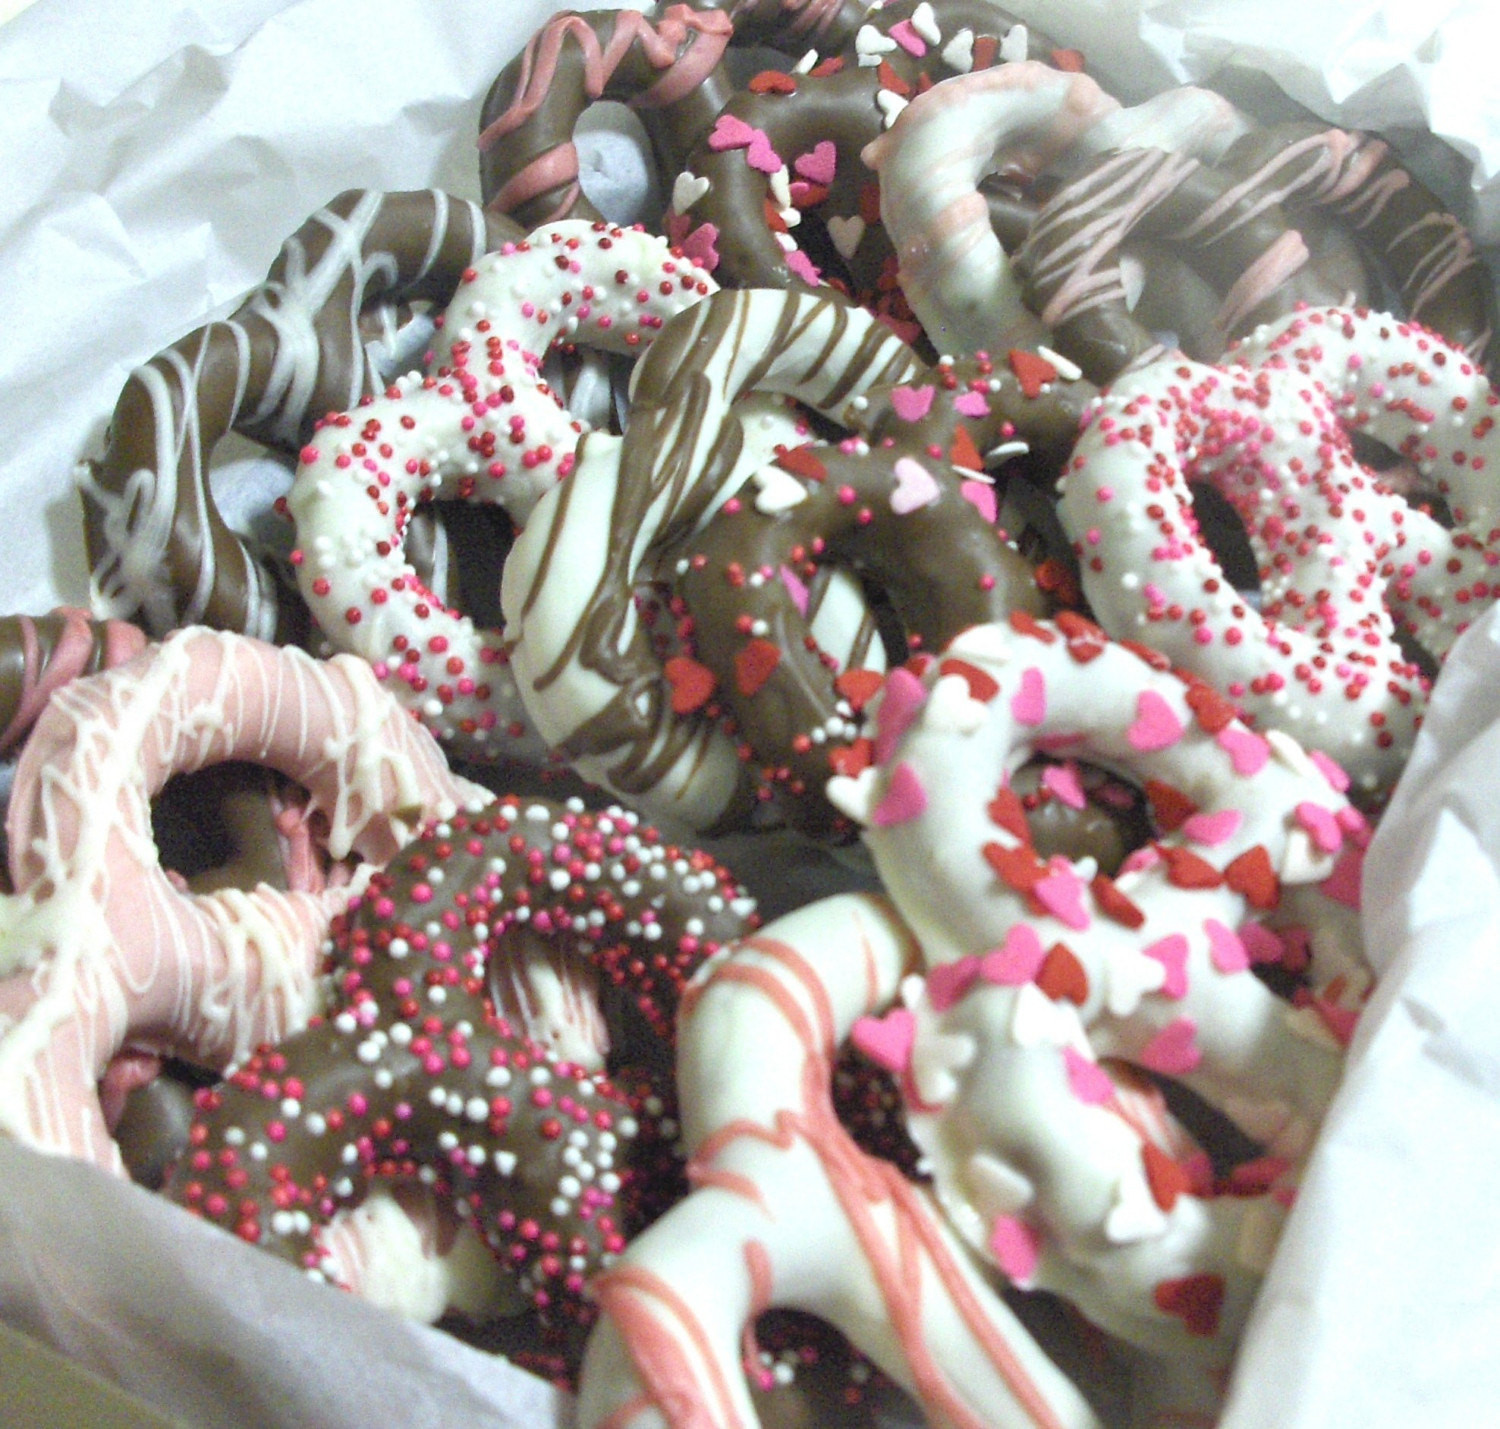 Chocolate Covered Pretzels For Valentine Day
 VALENTINE CANDY Chocolate covered pretzels by FuzzyButtFarm